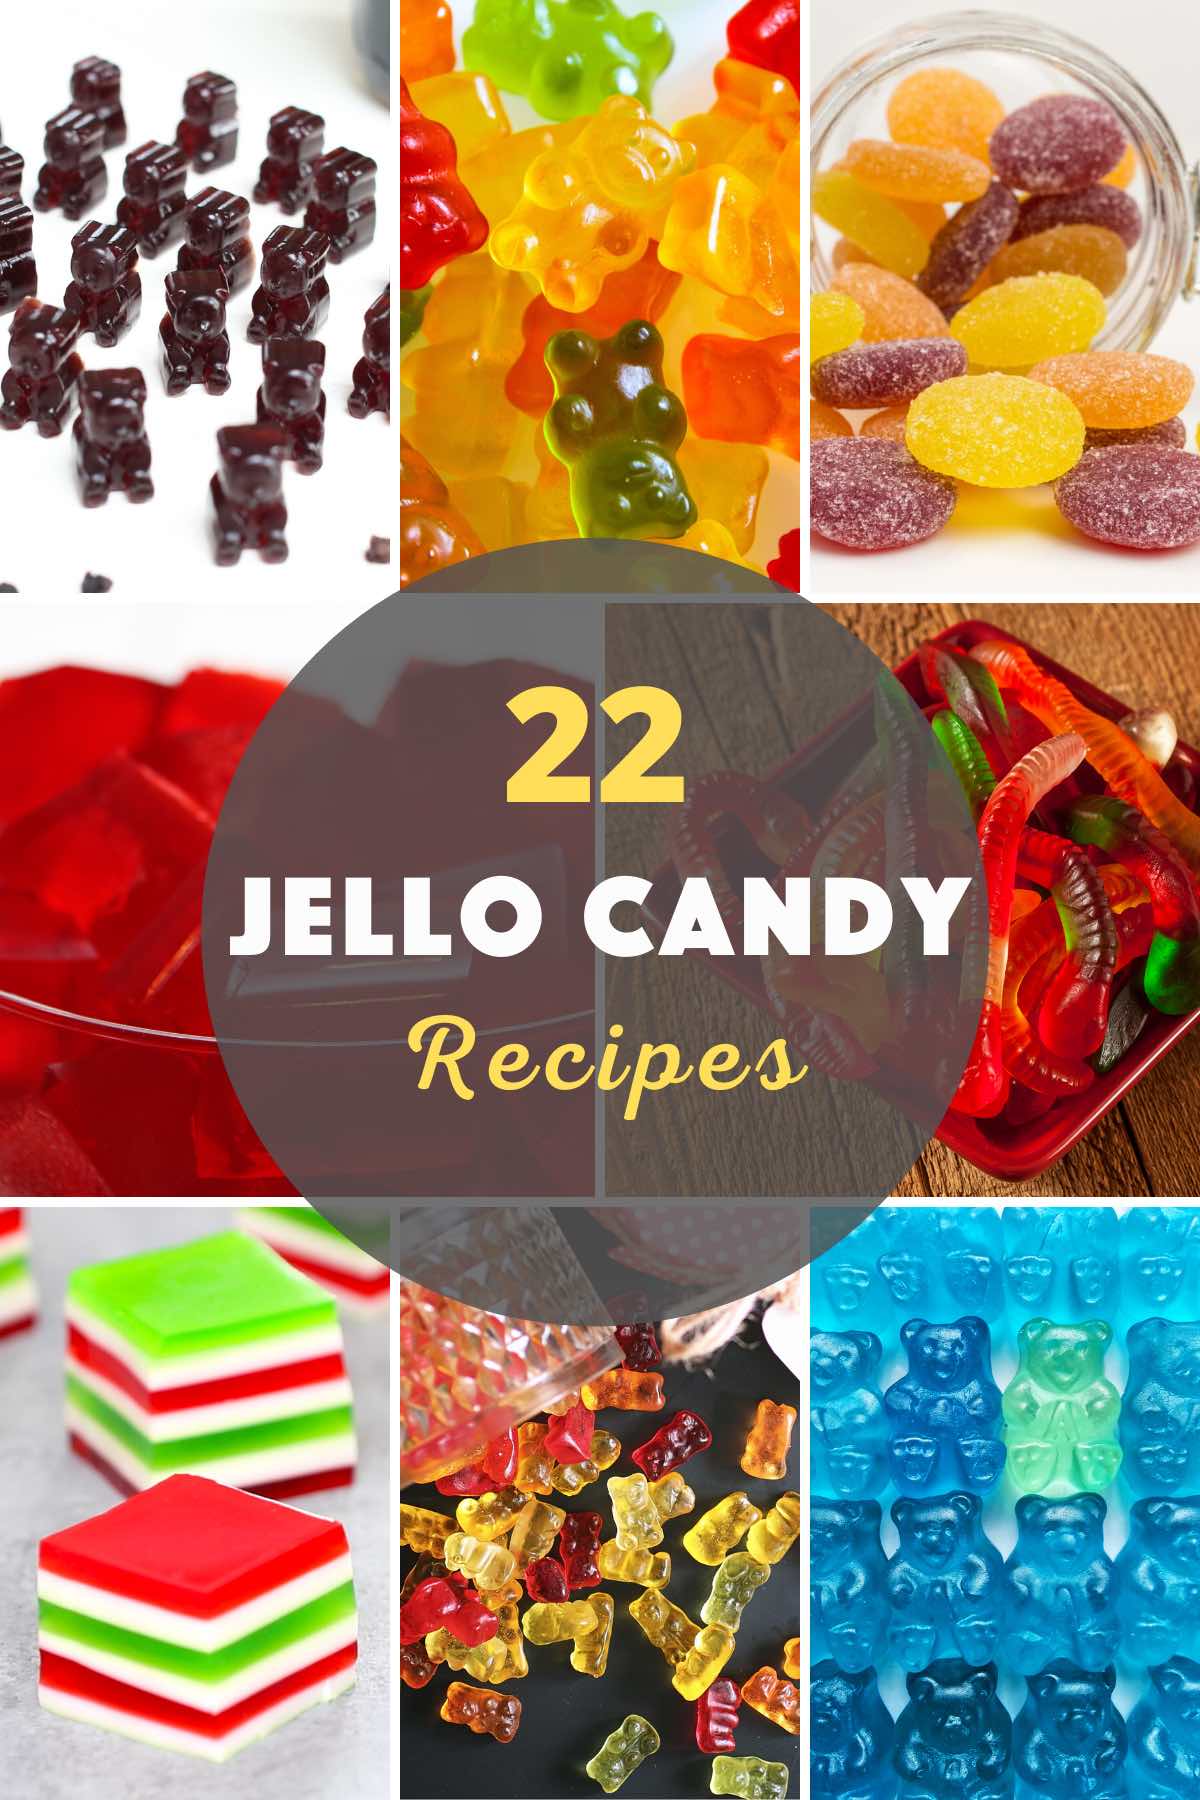 The best Jello Candy recipes all in one place! Here are 22 easy and delicious jelly candy recipes from Jello Gummy Bear to Fruity Jelly Candy. These ideas include options for snacks, dessert, kids-friendly candies, and alcohol-infused jello shots. I’m sure you’ll find your favorite! #JellloCandy #JelloCandyRecipe #JellyCandy